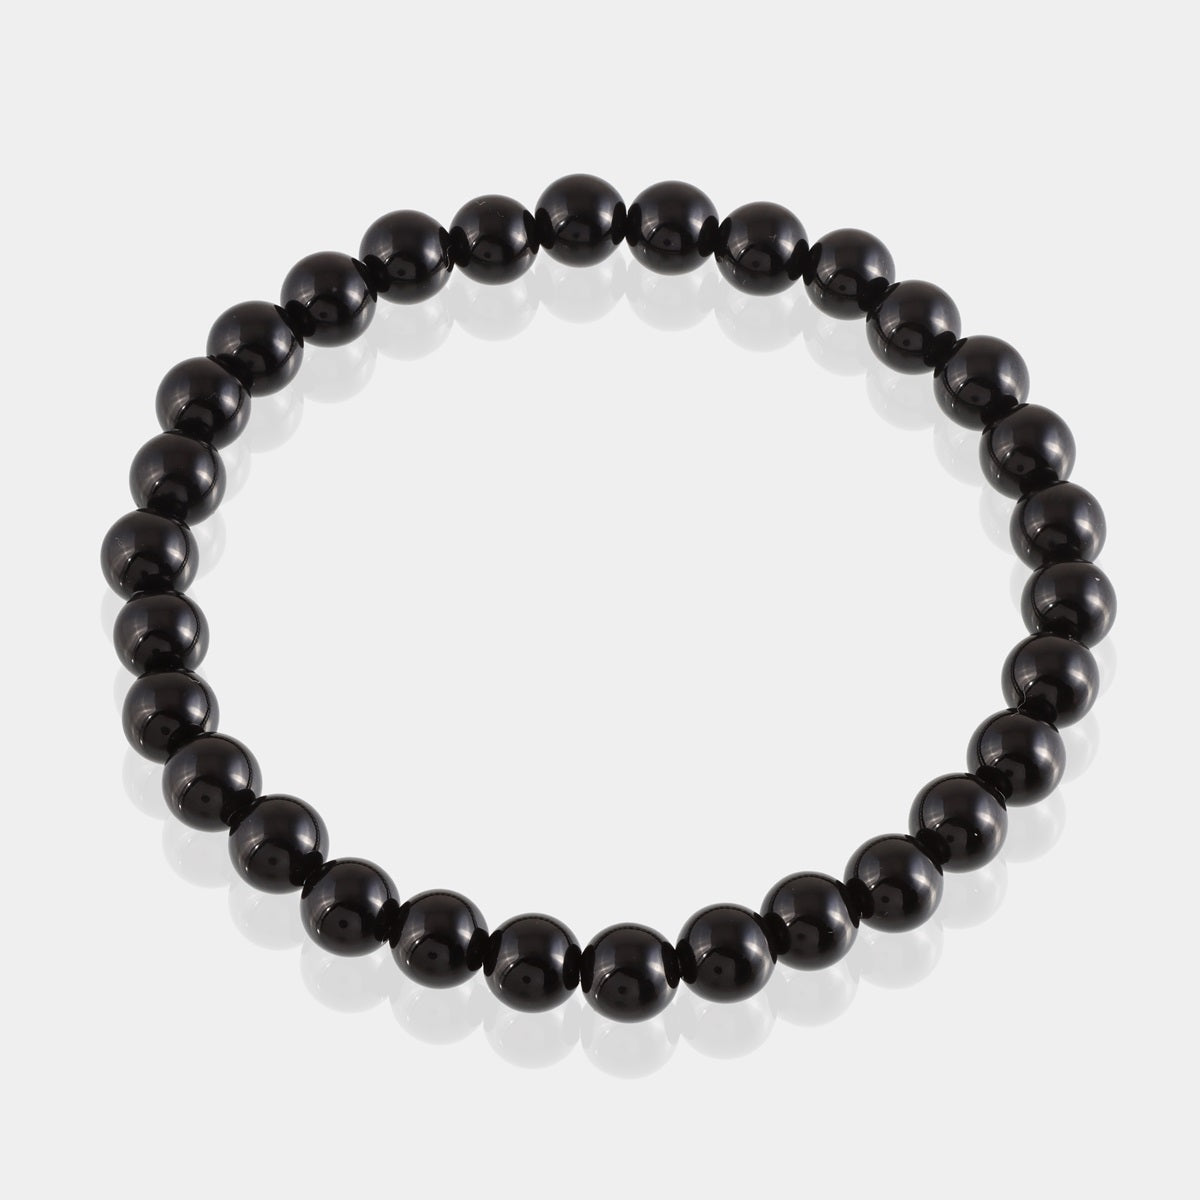 Elegant Black Onyx Bracelet with 6mm and 8mm smooth round stones, radiating strength and grounding energy